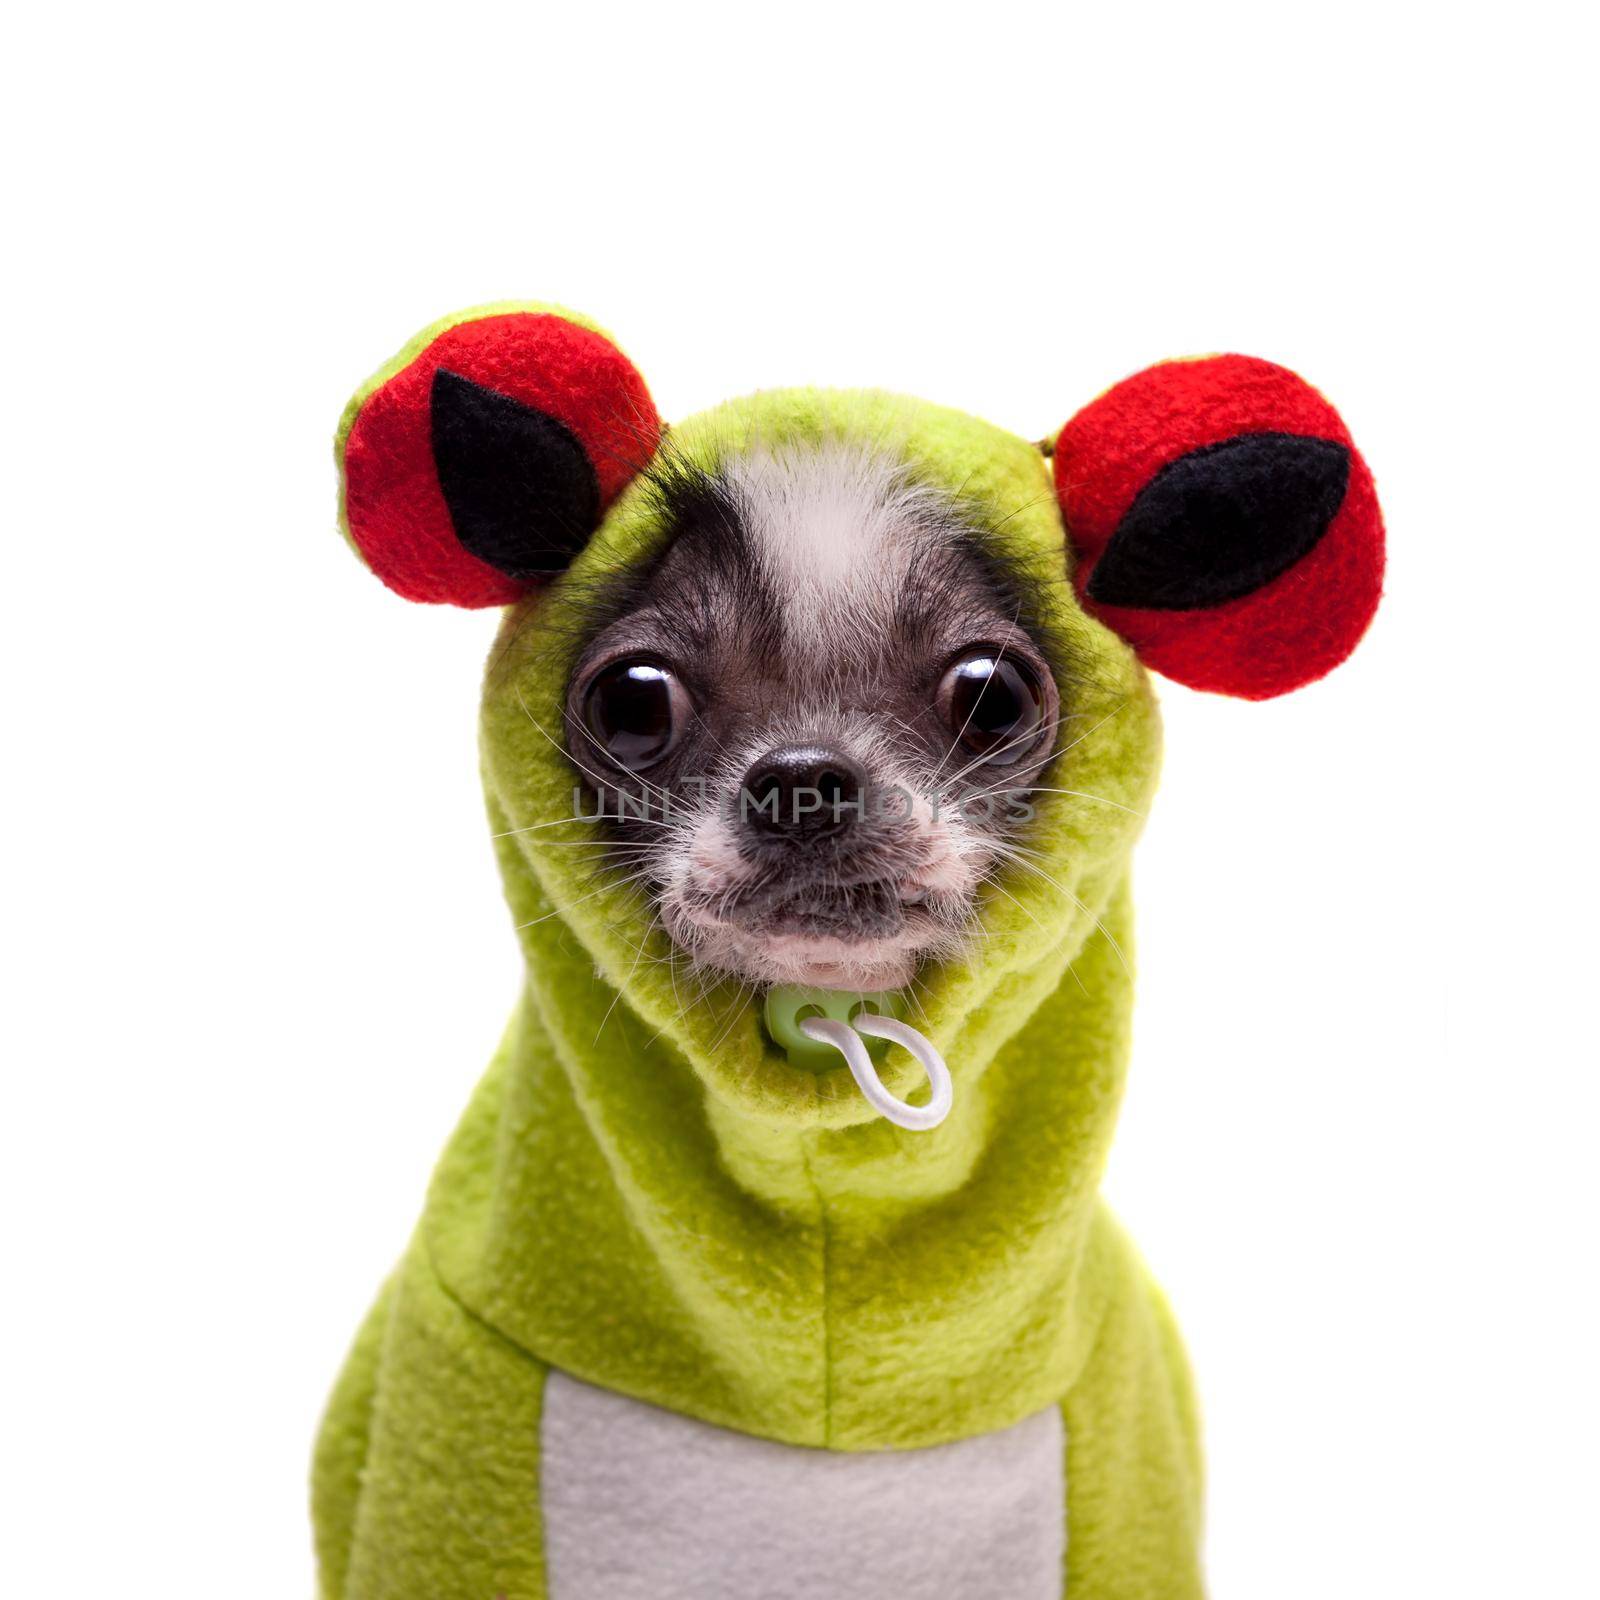 Peruvian hairless and chihuahua mix dog in frog costume isolated on white background